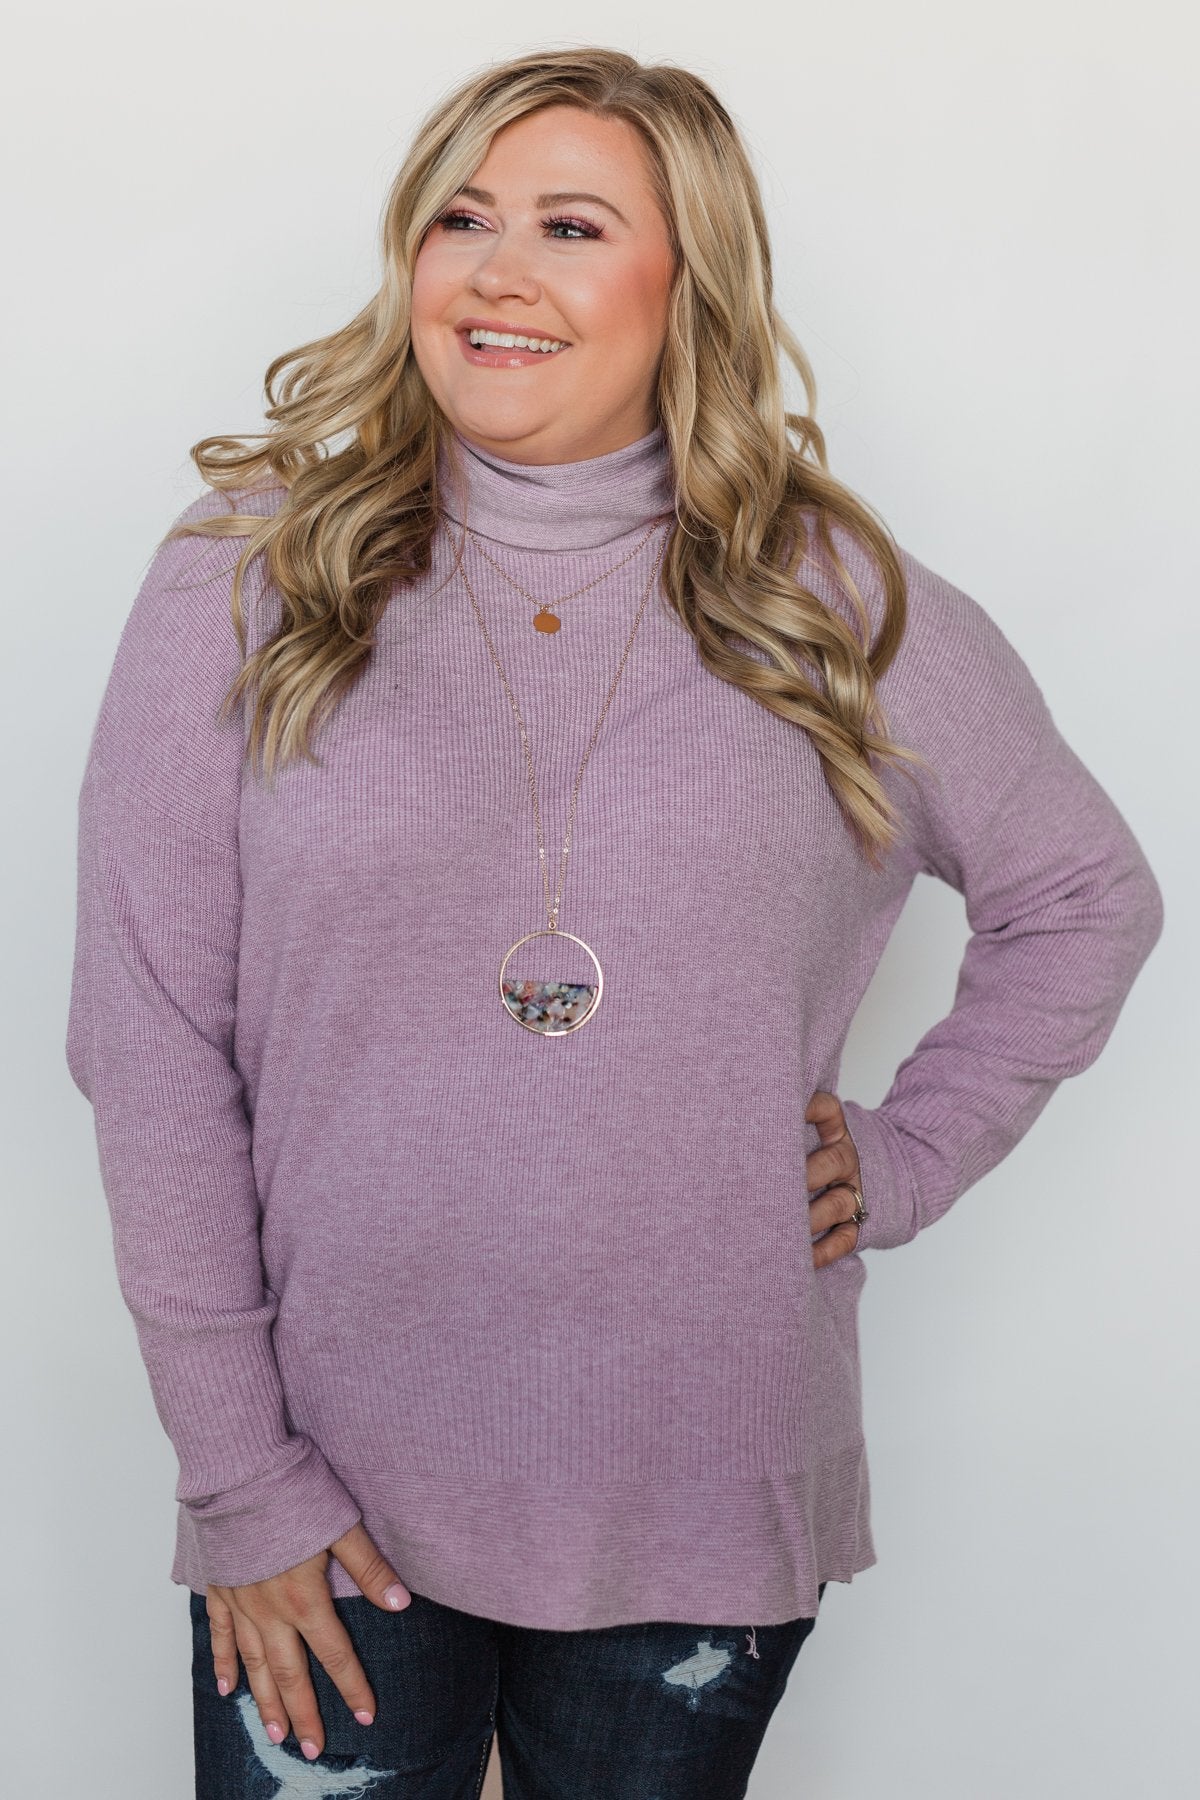 Stuck in a Daydream Turtle Neck Sweater - Lavender